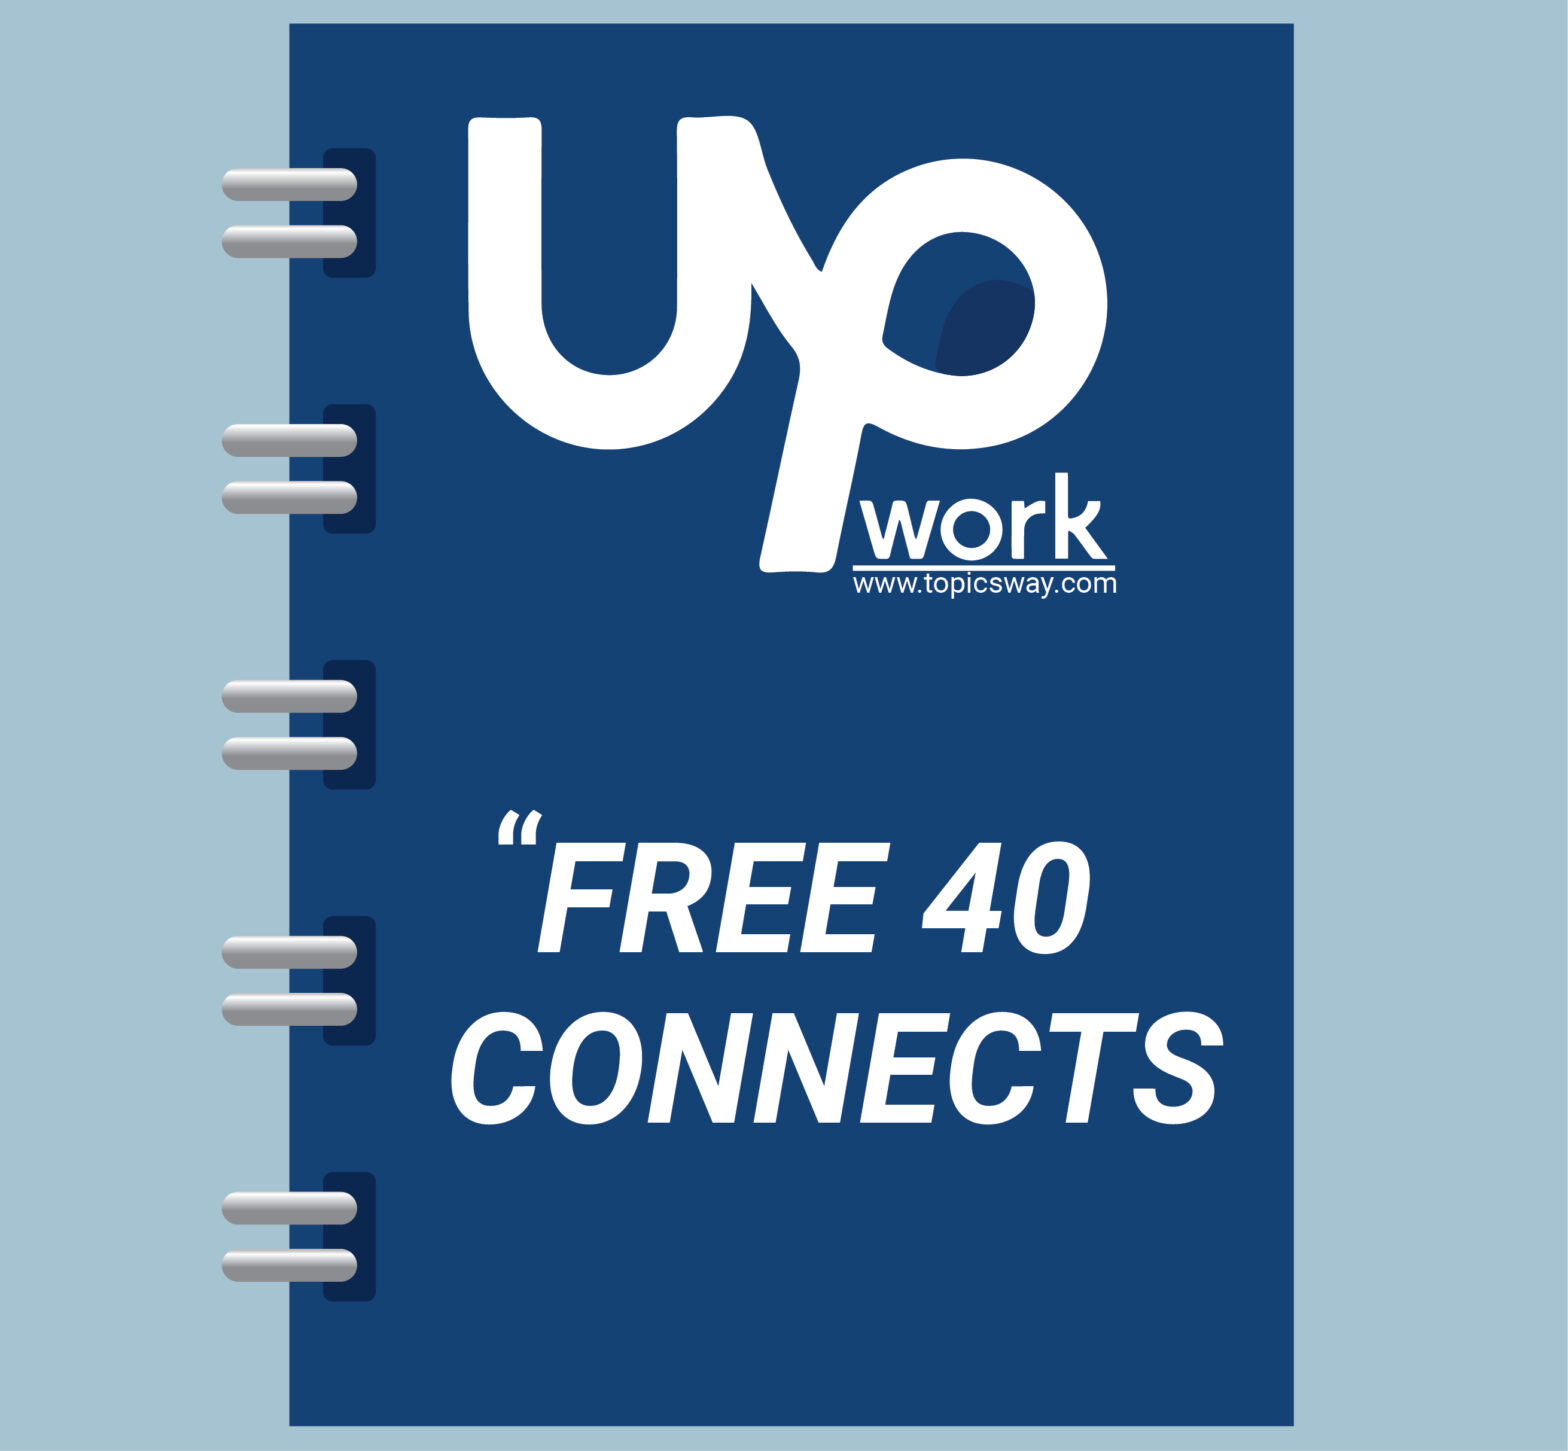 FREE 40 CONNECTS UPWORK - USING PROMO CODE